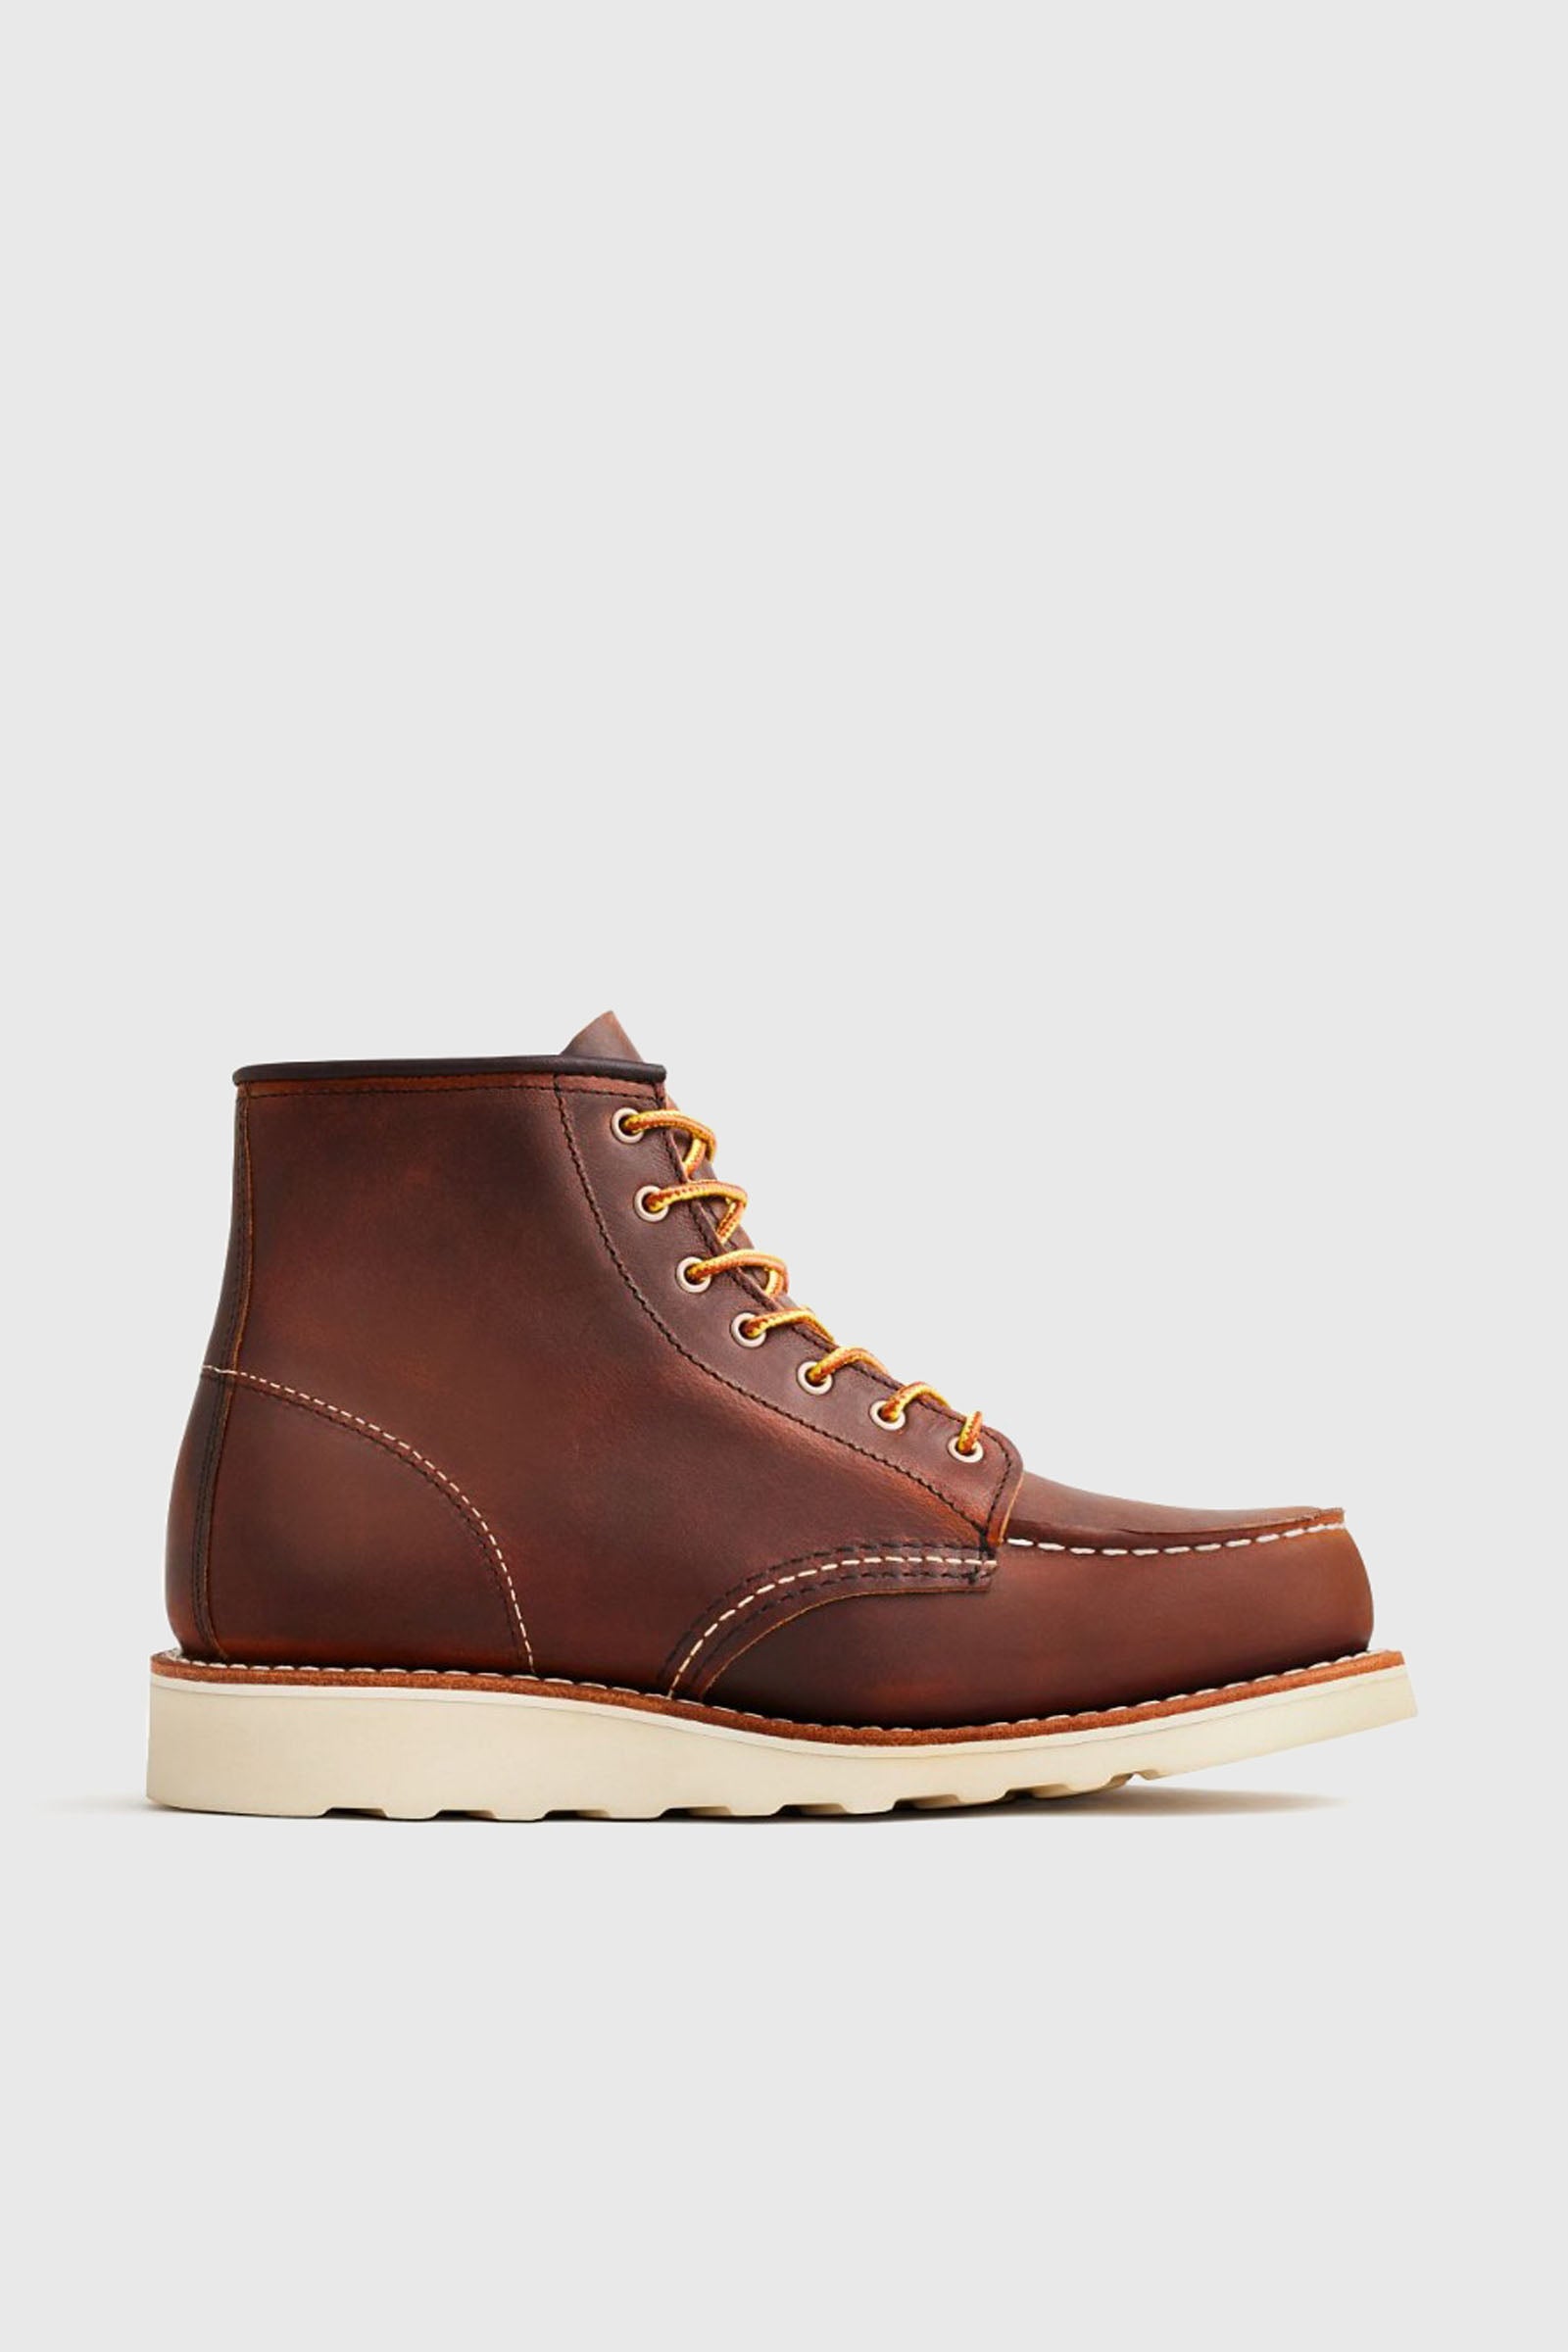 Red Wing Shoes 6-Inch Classic Moc Brown Leather - 1